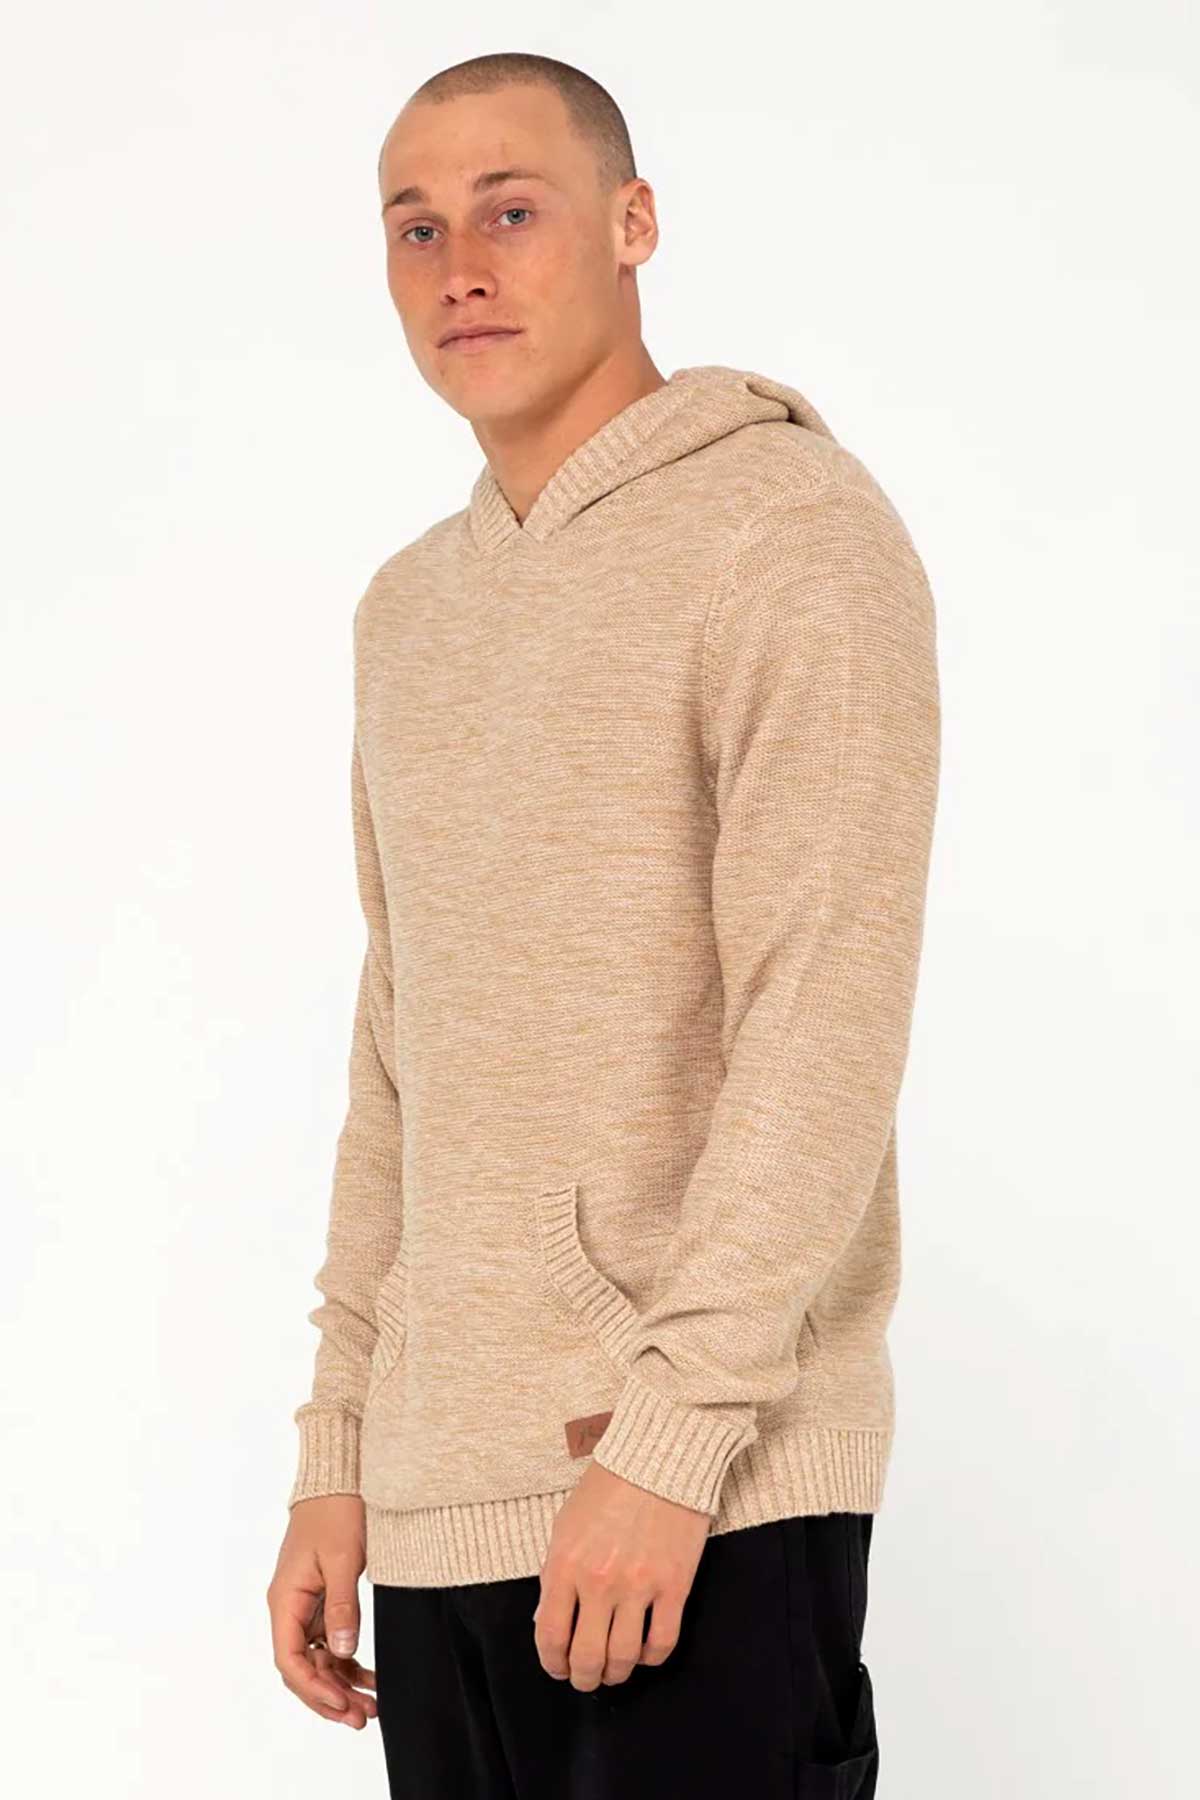 Rusty Hood Knit Jumper - Skyliner Humus, with large front pocket.